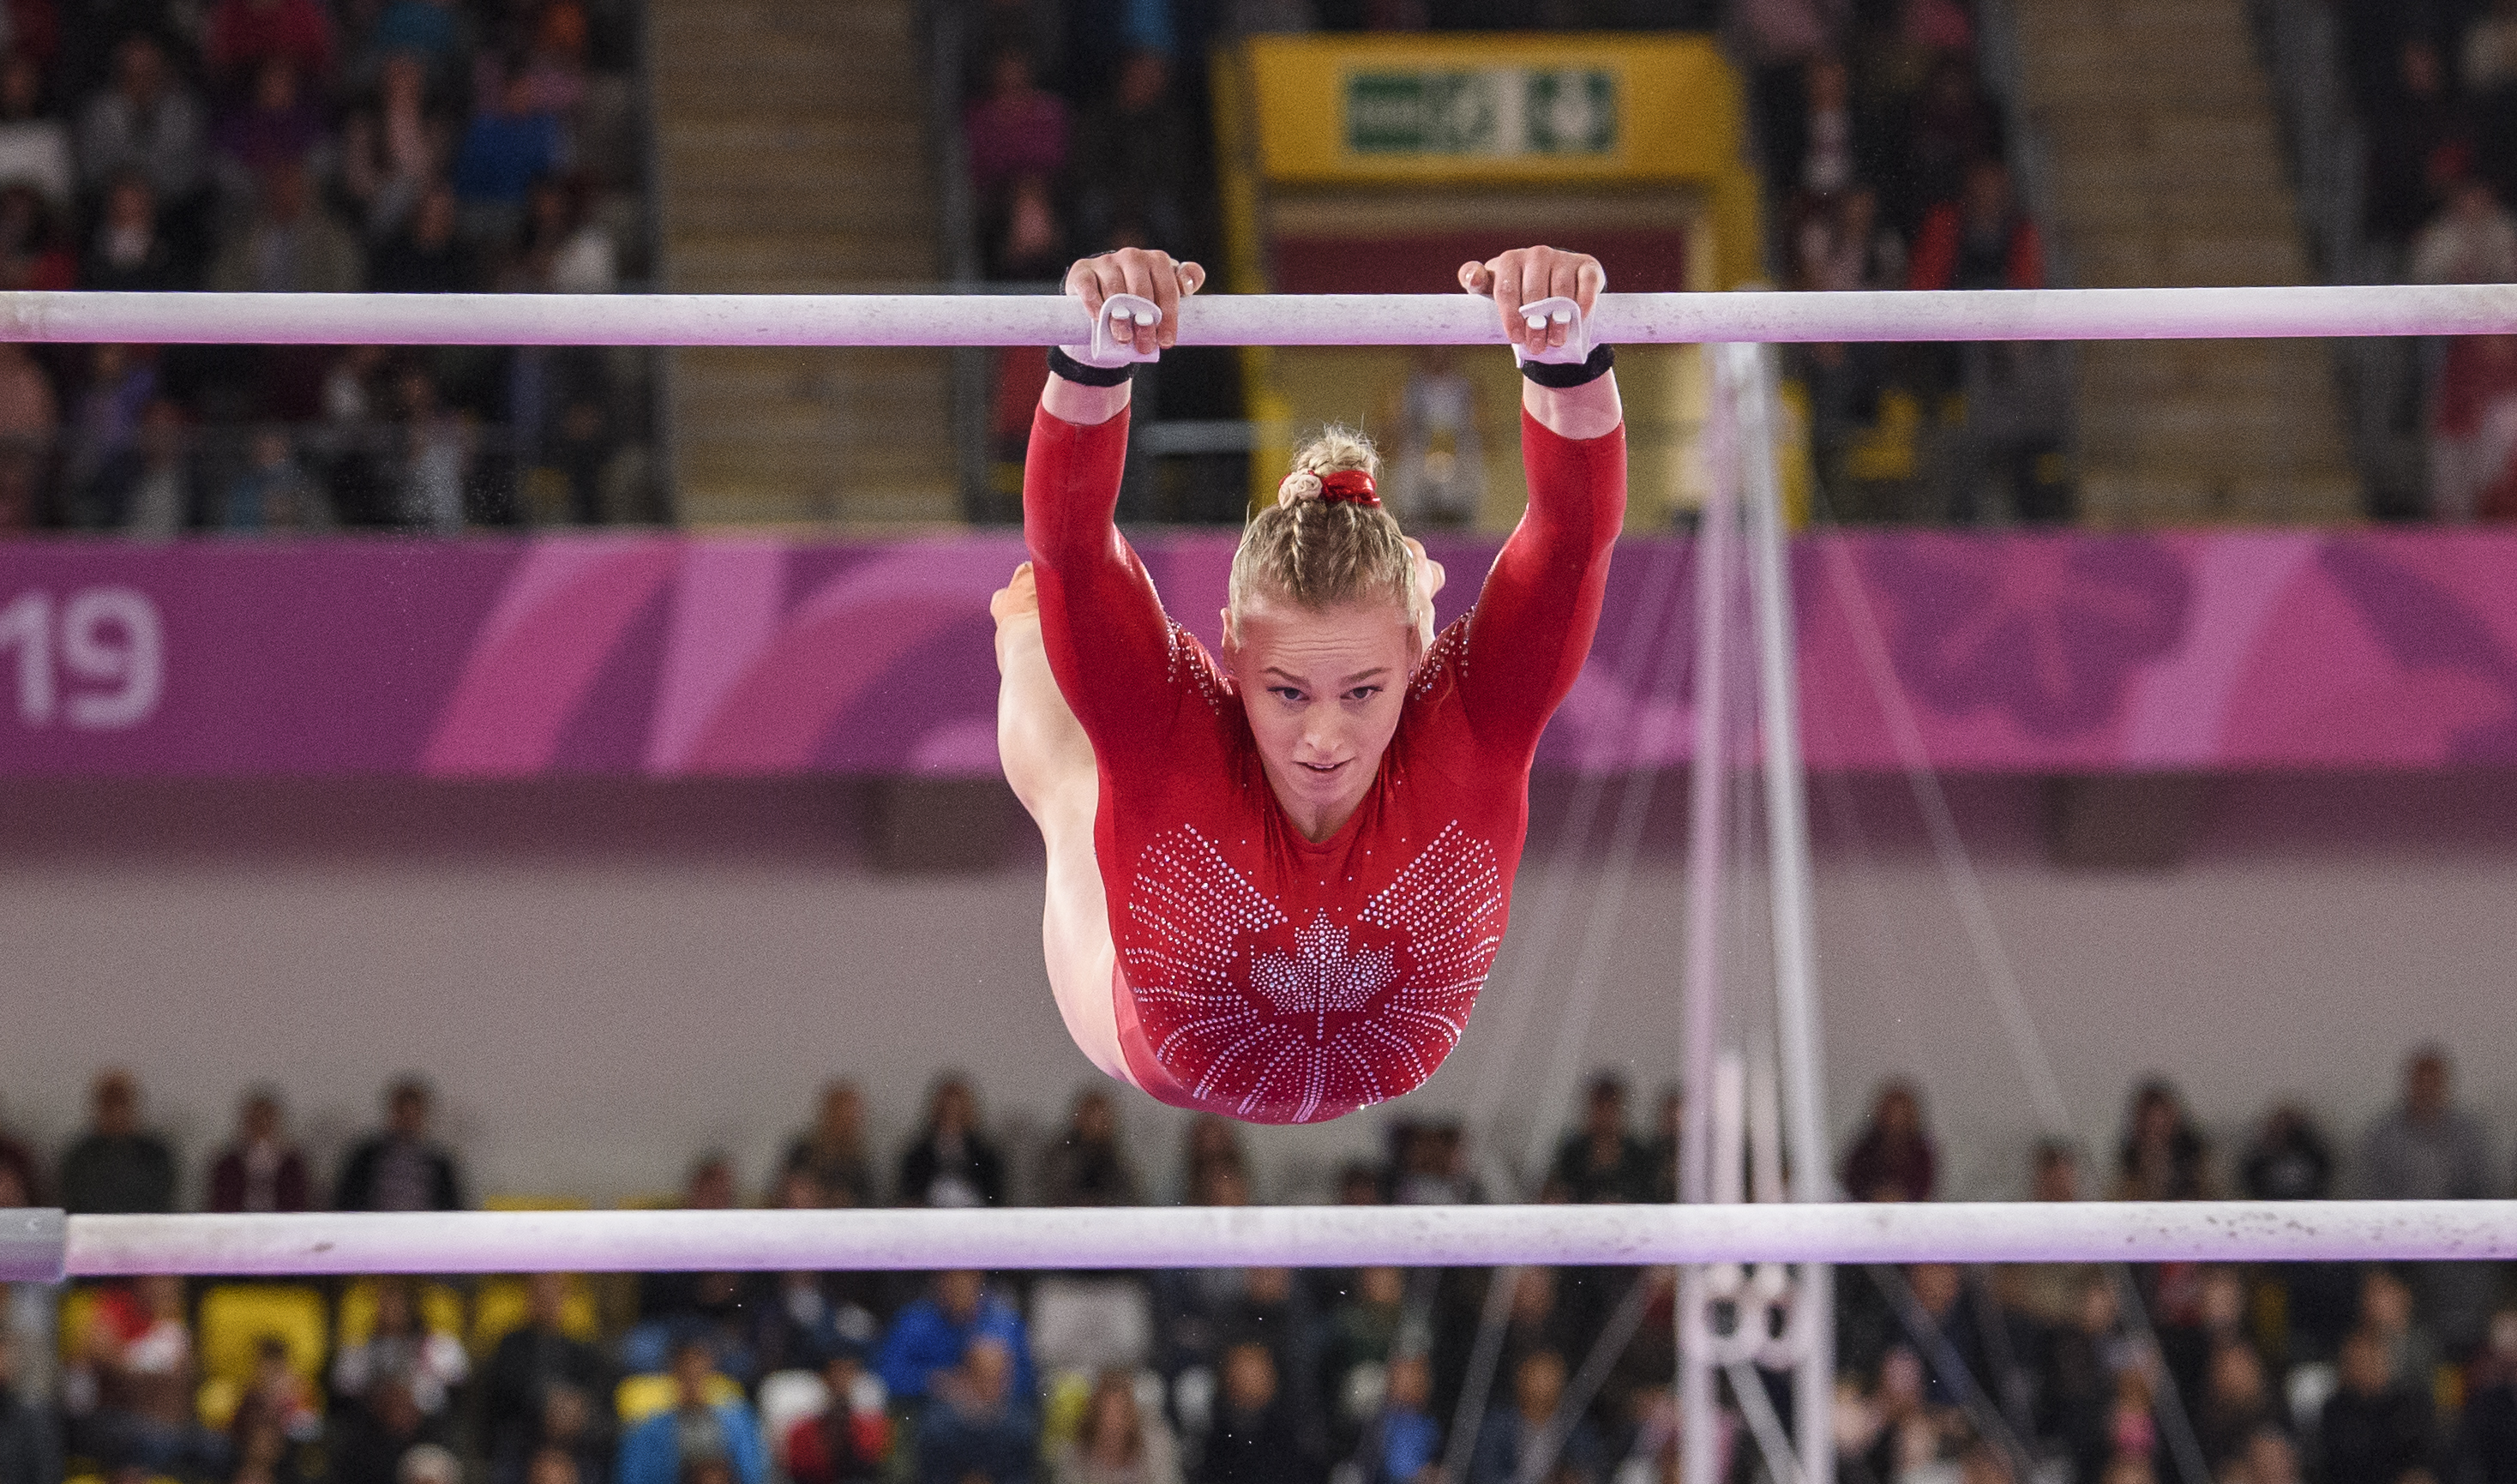 Gymnast swings on the uneven bars